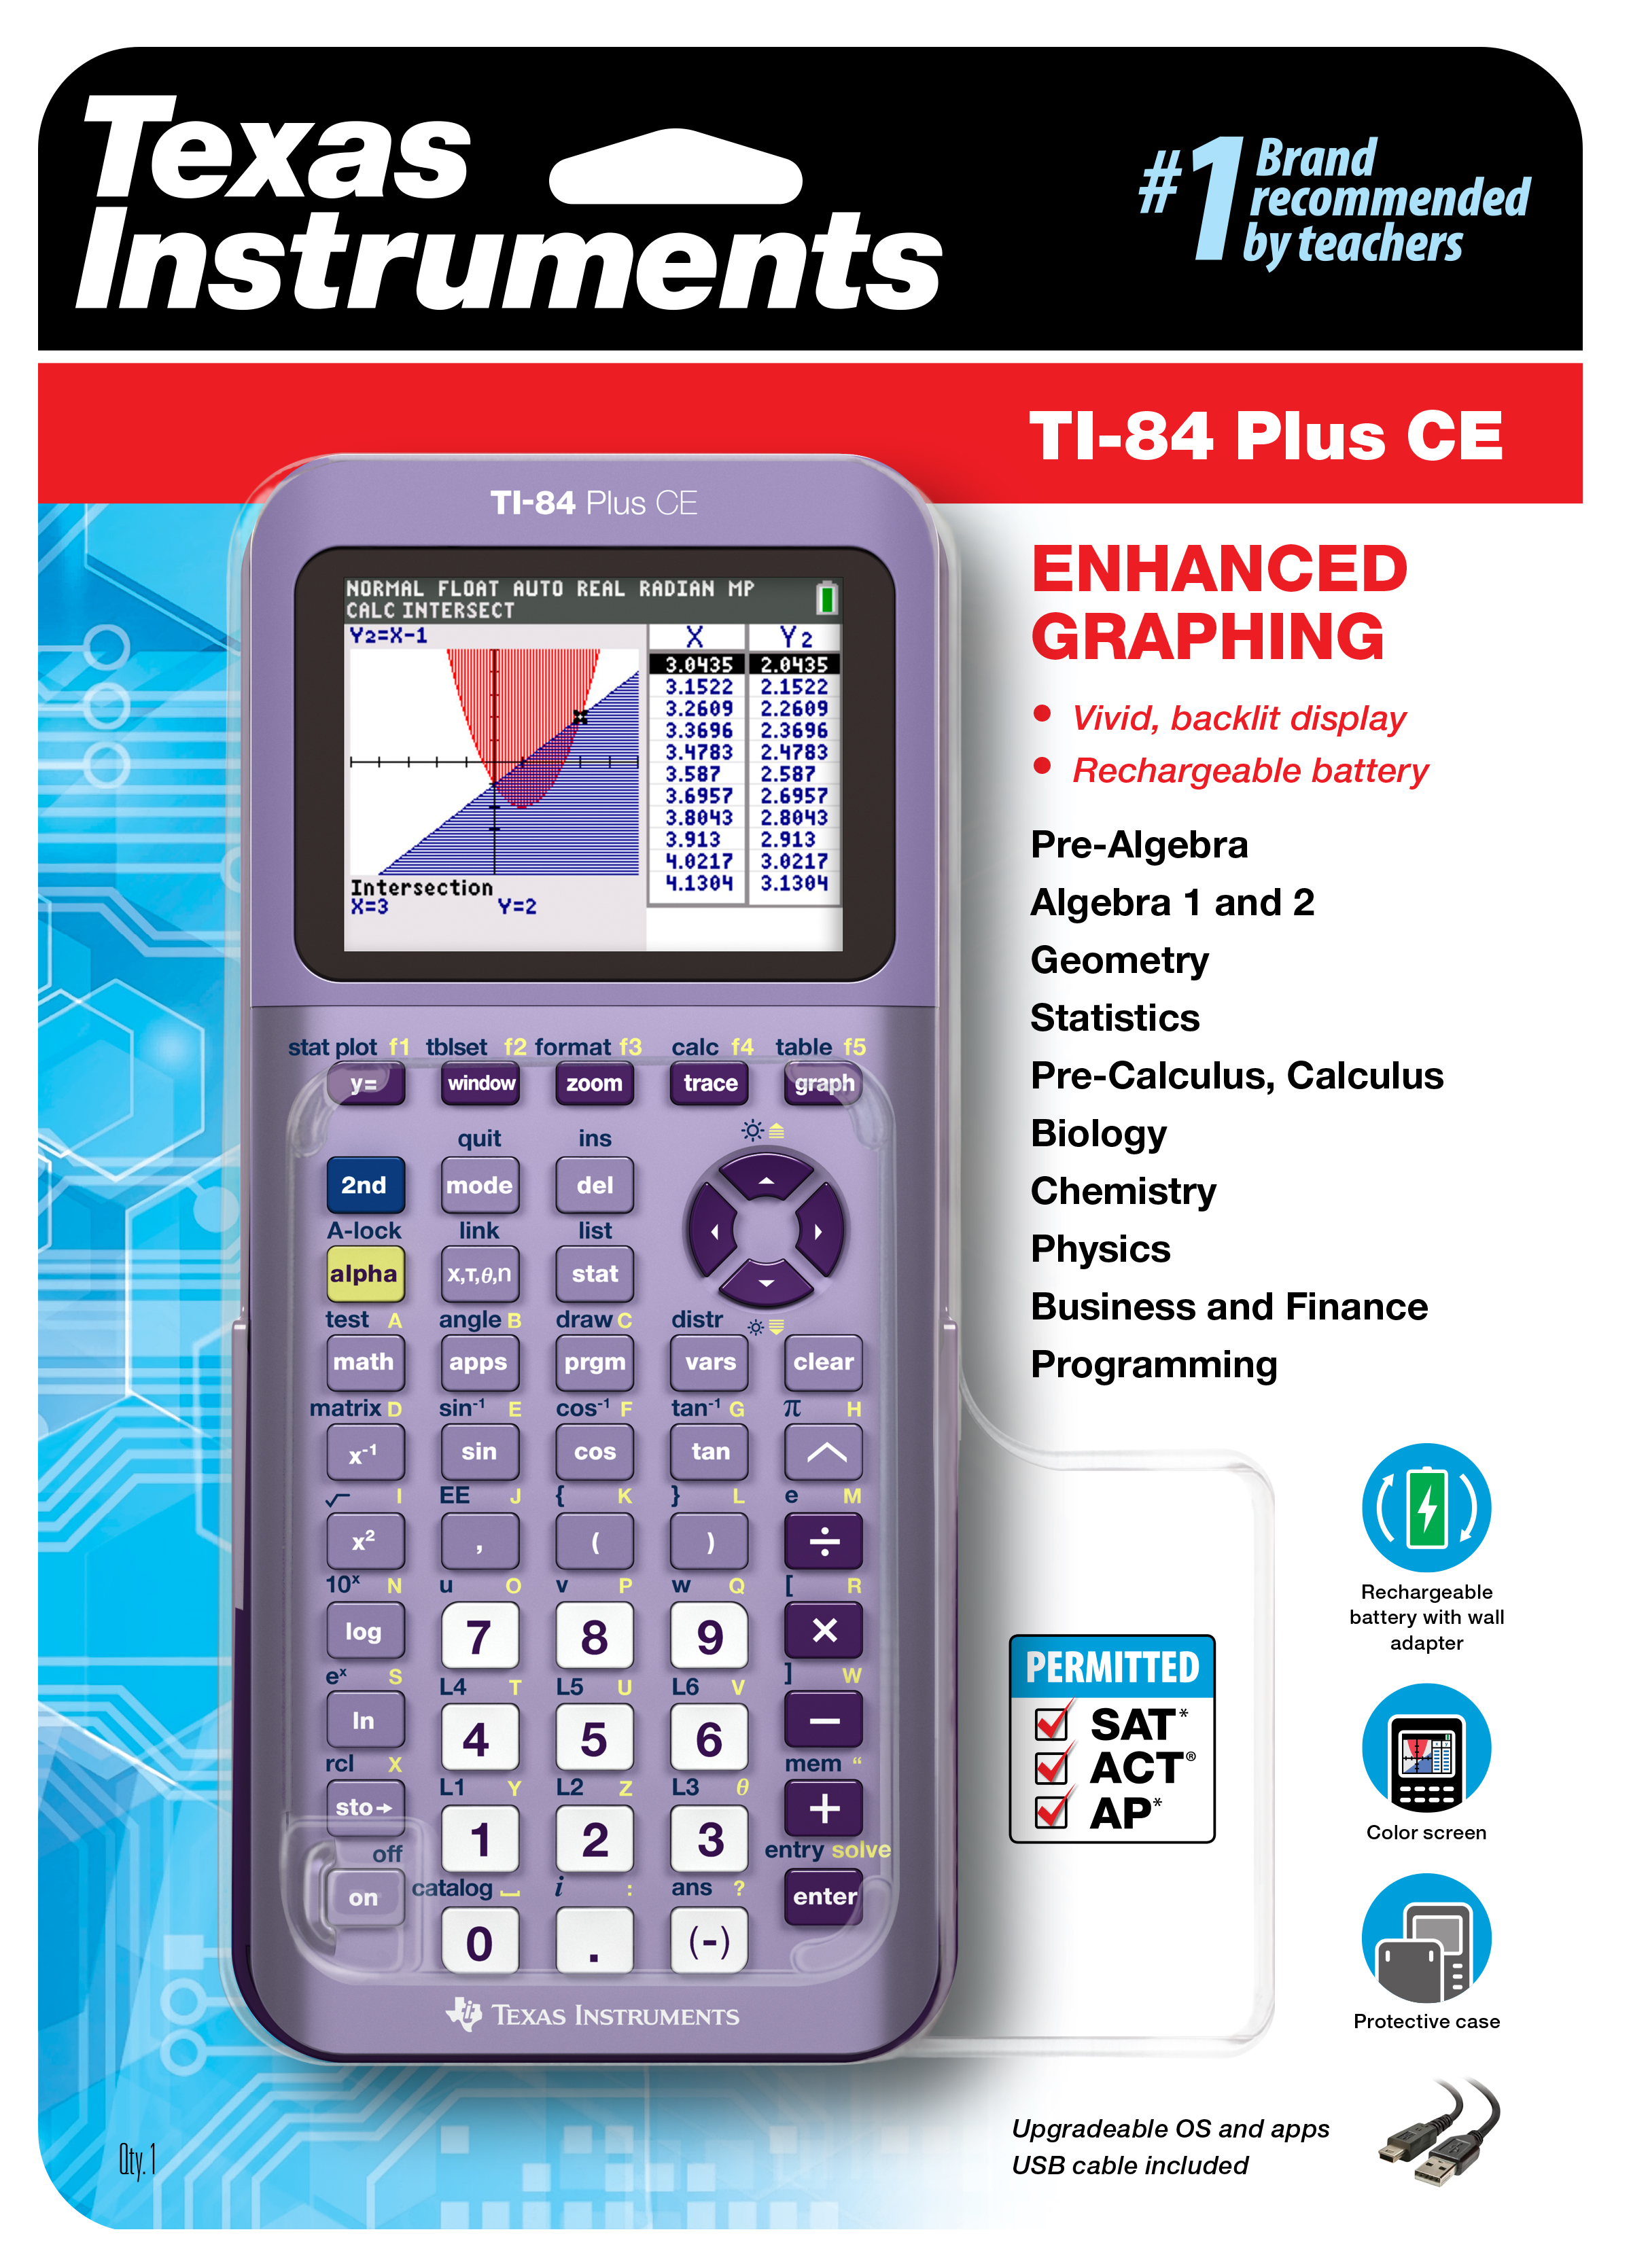 Texas Instruments Purple TI-84 Plus CE Graphing Calculator - image 1 of 4